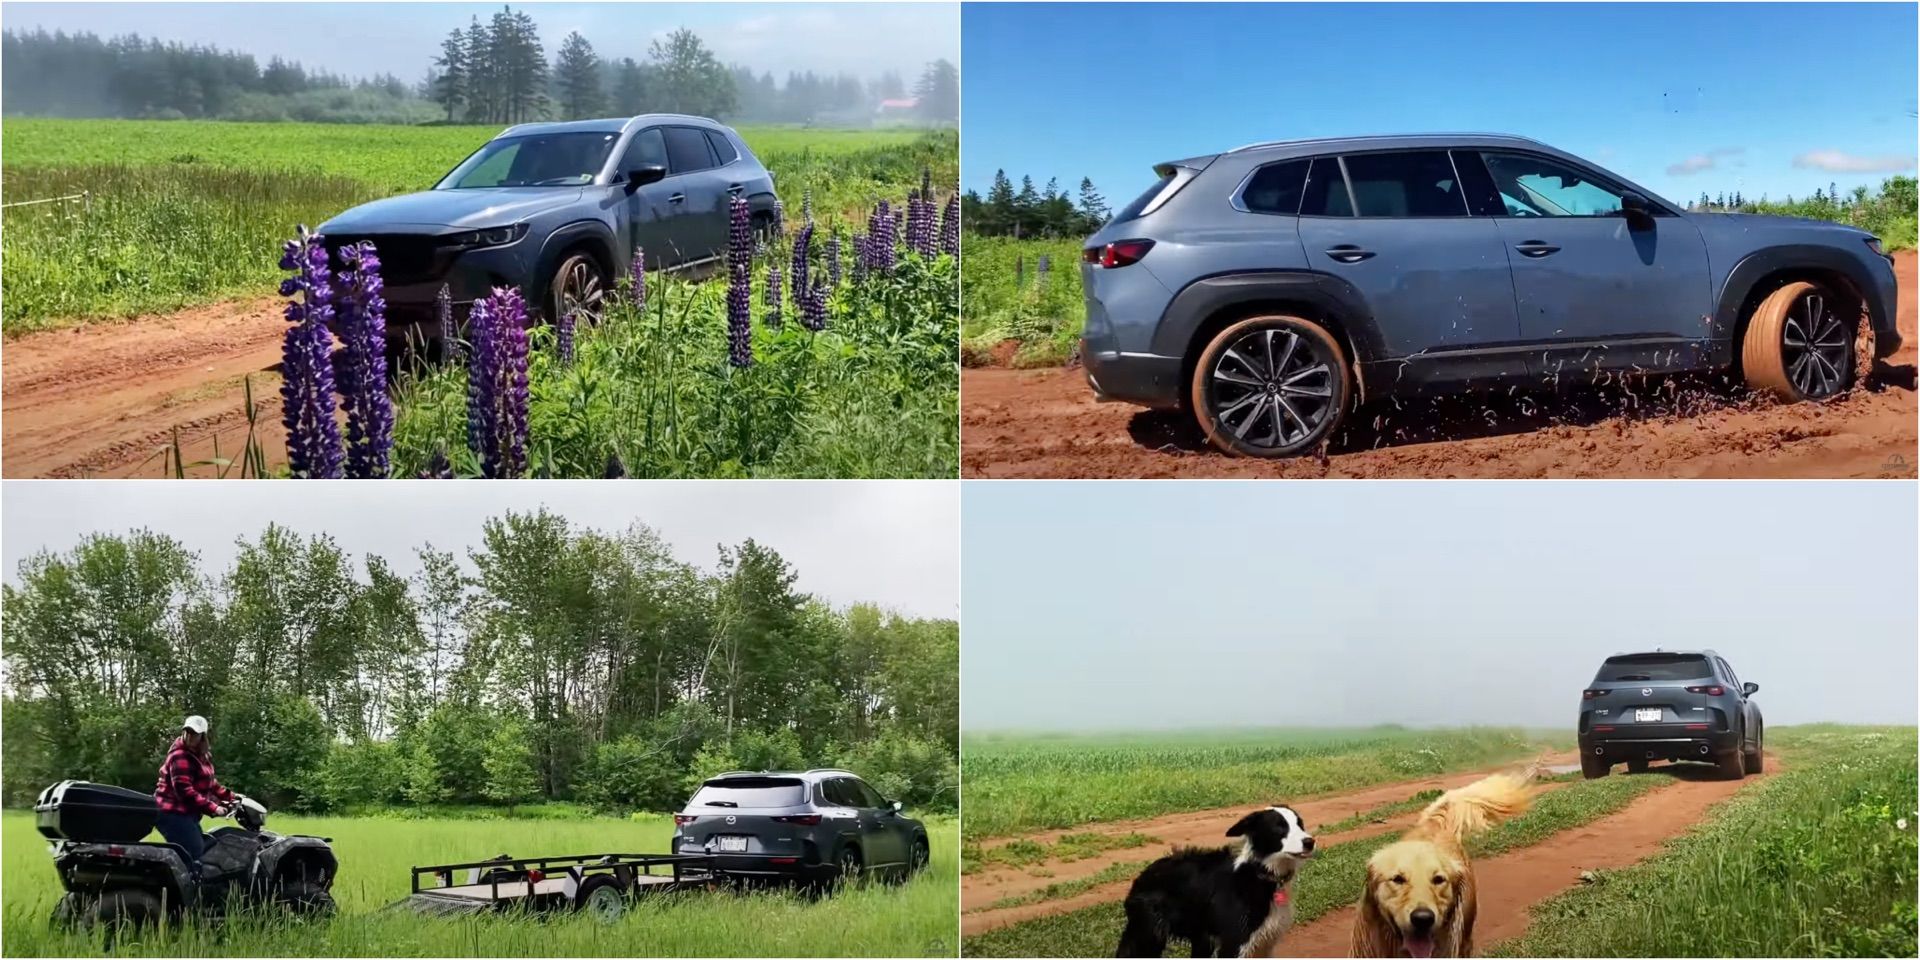 Video: 2023 Mazda CX-50 On PEI's Dirt Roads With Centennial's Own Kelly Dowling